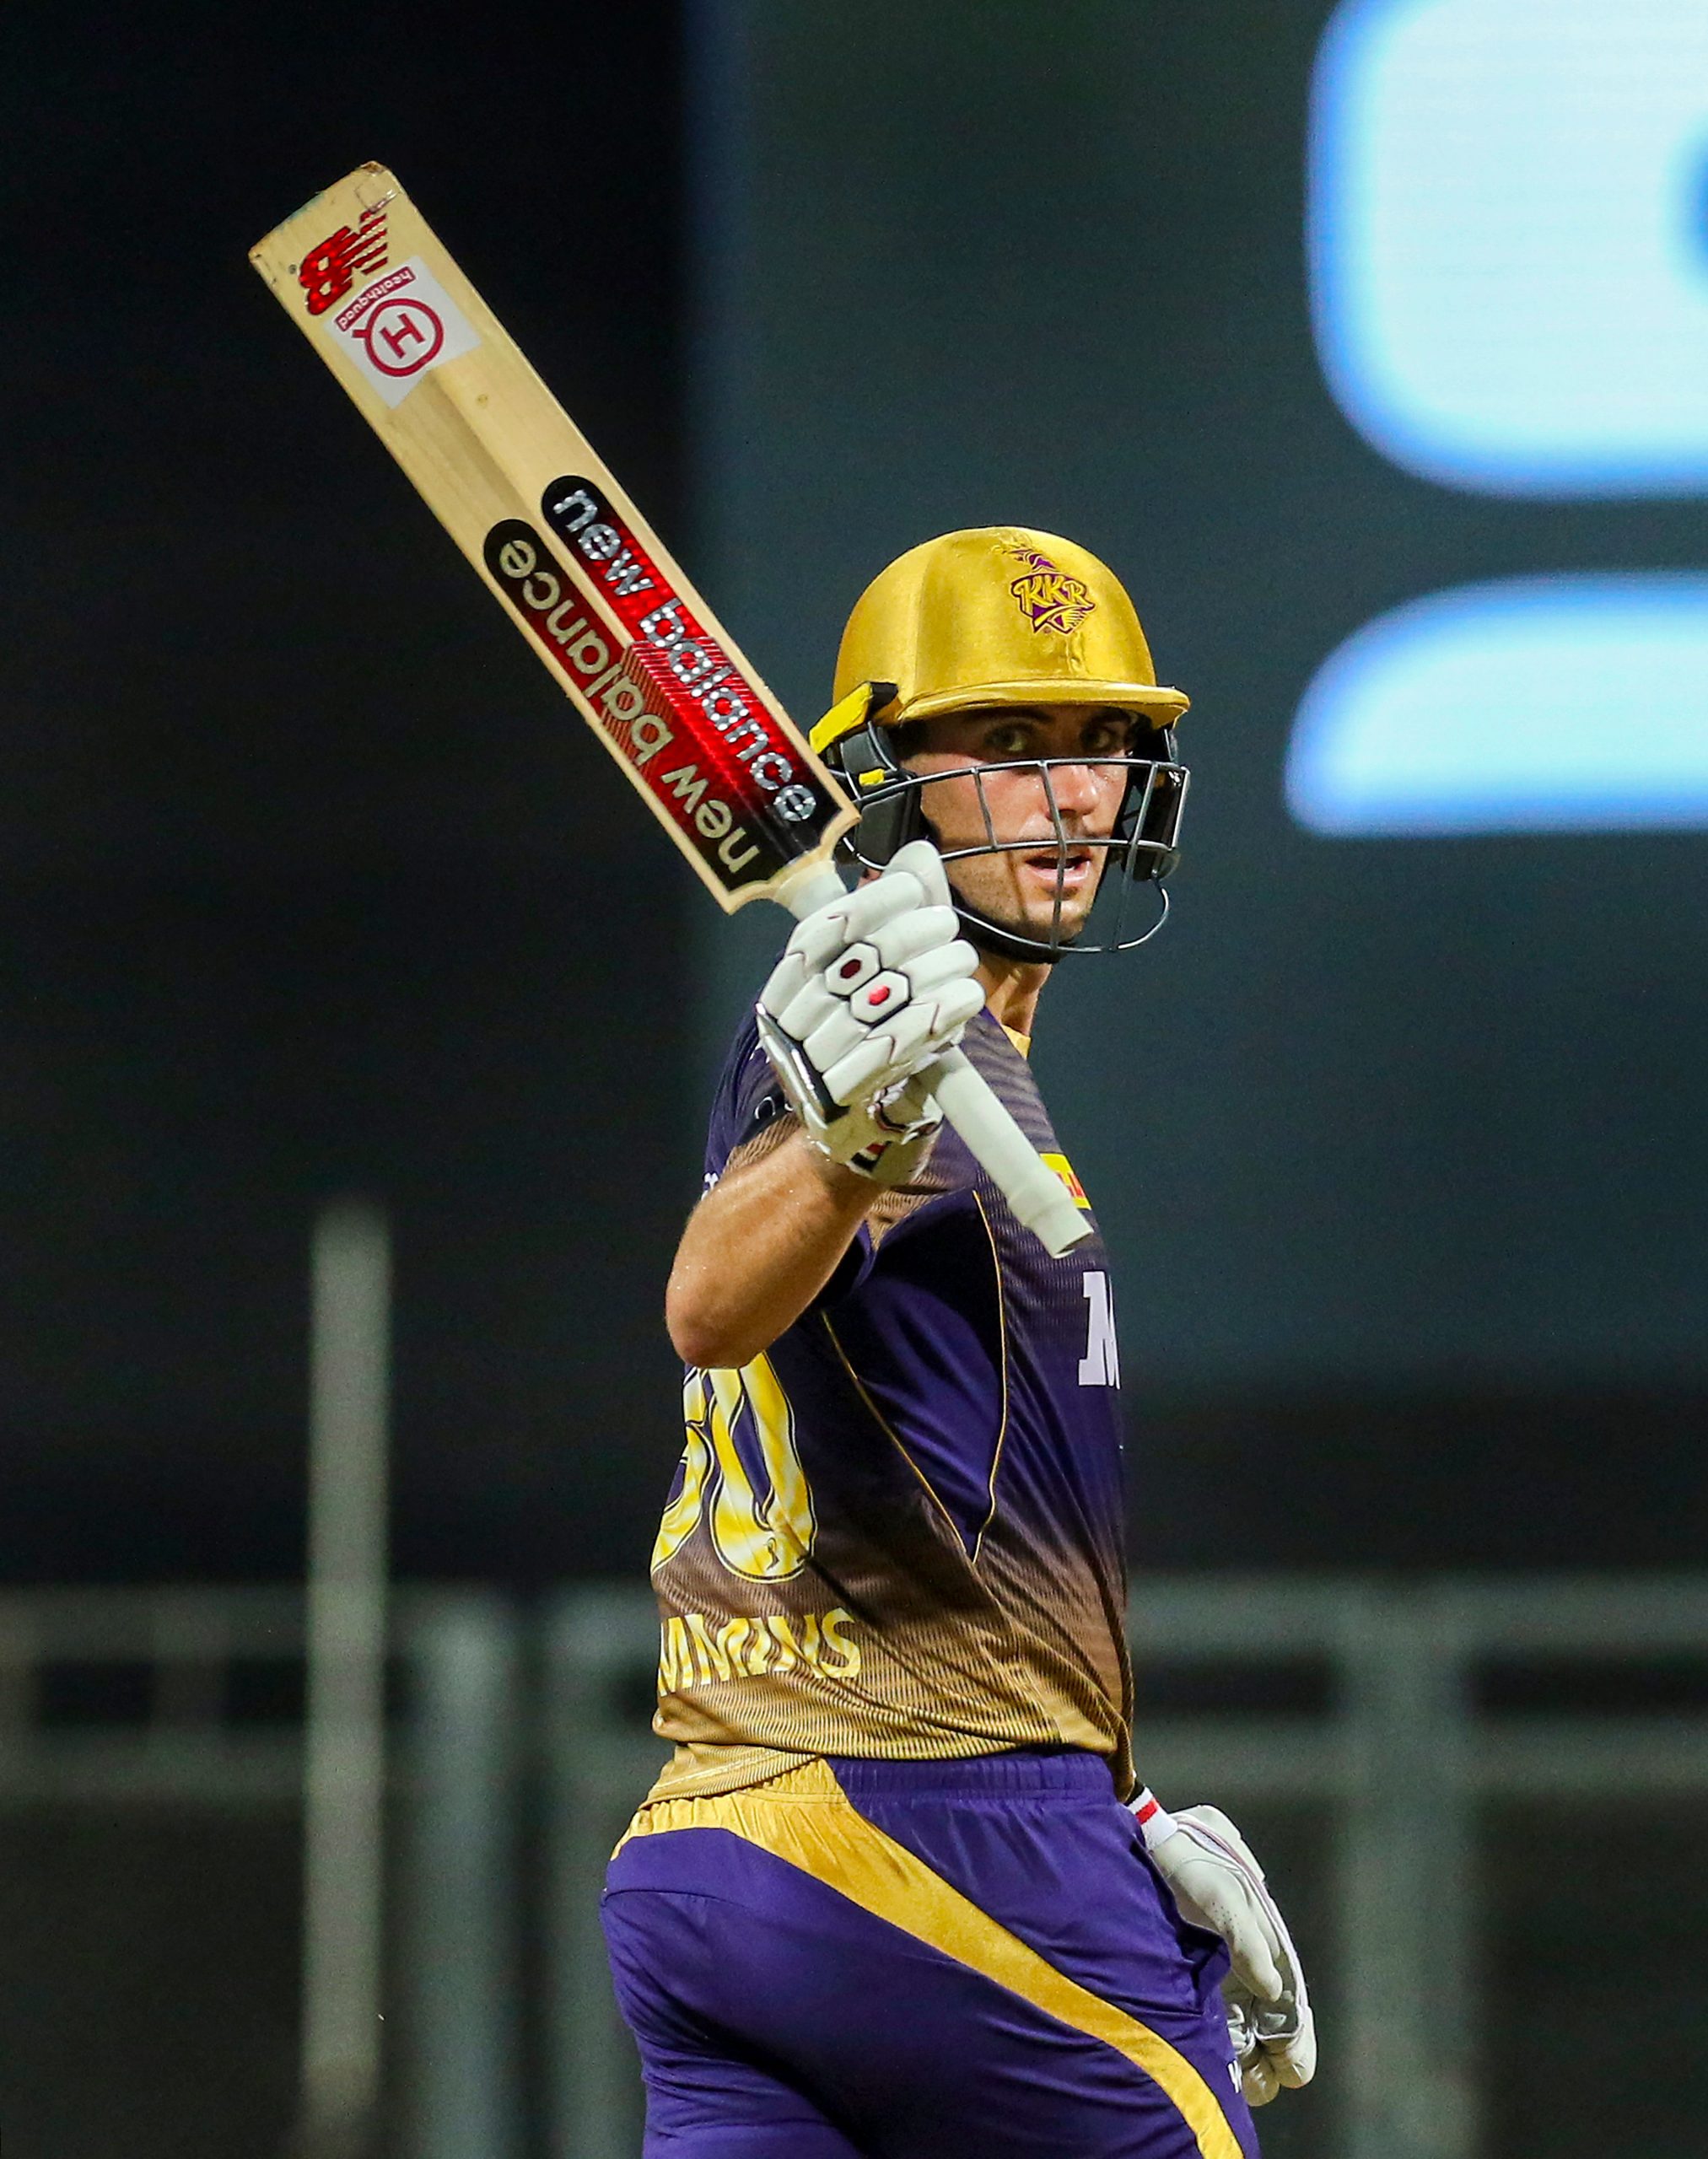 Pat Cummins gets special cake from Kolkata Knight Riders on his 29th birthday